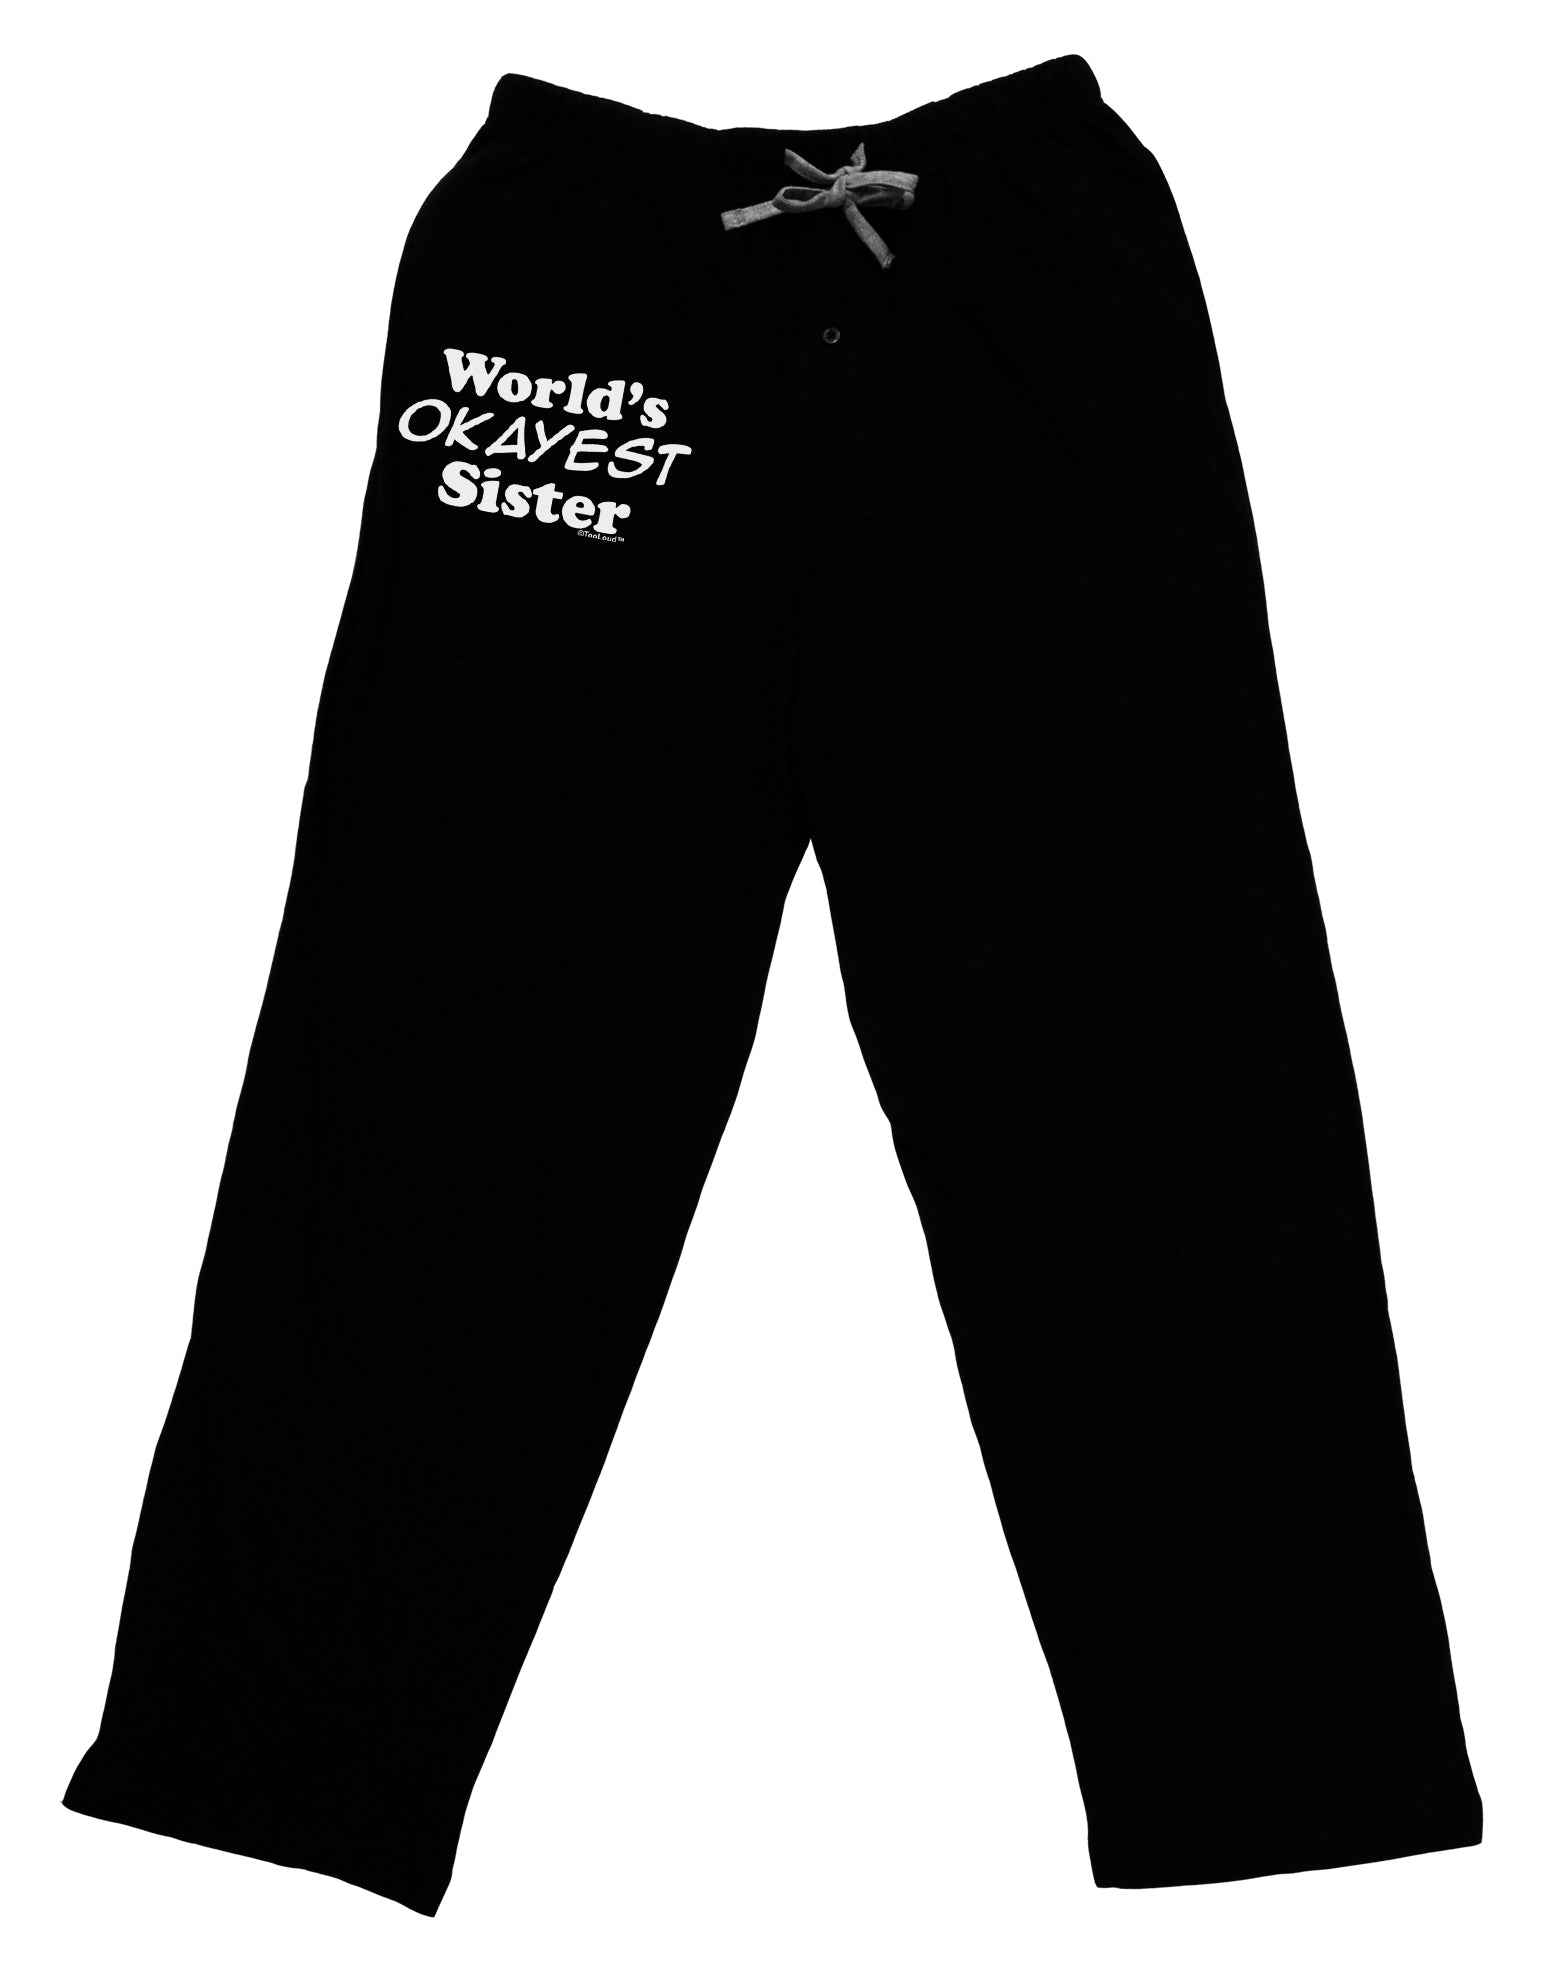 . Adult Performance Sweat Pants with Lettering